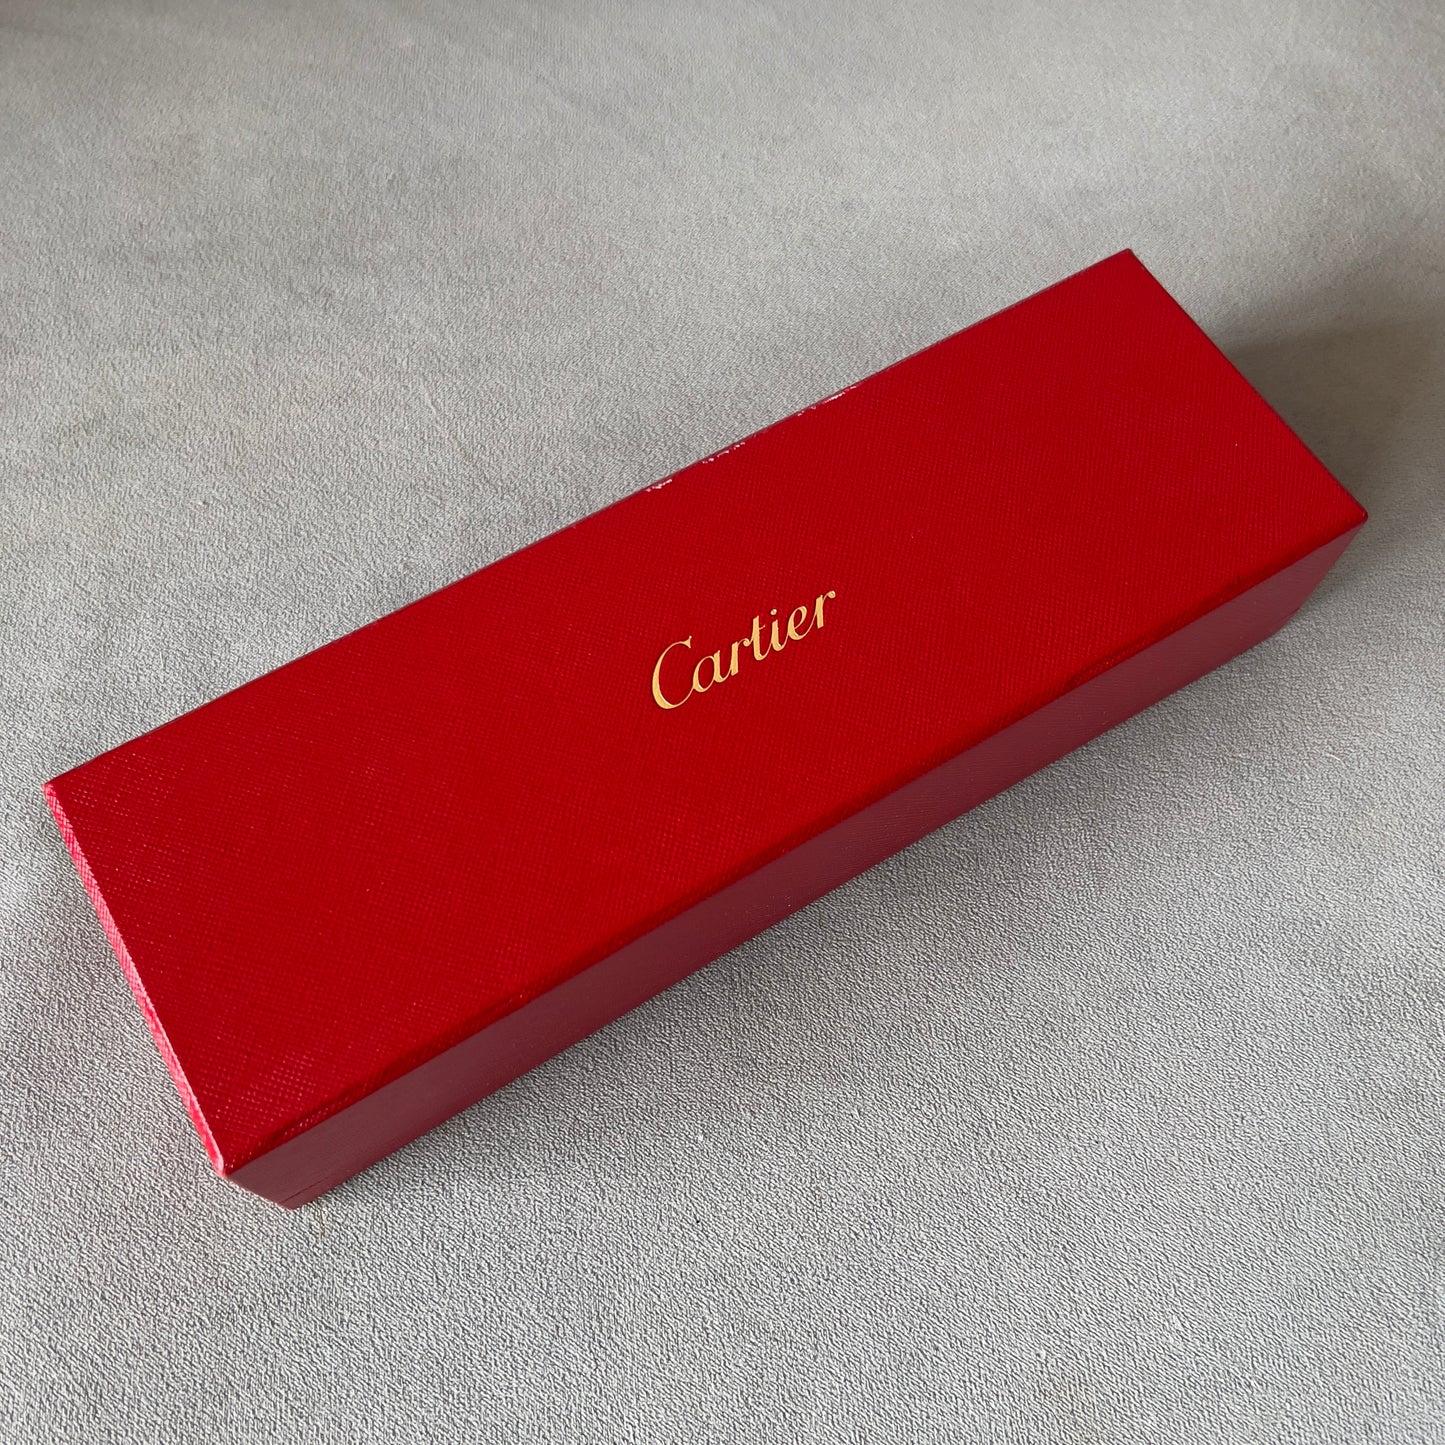 CARTIER Bracelet Box + Outer Box 9.40x3x1.90 inches